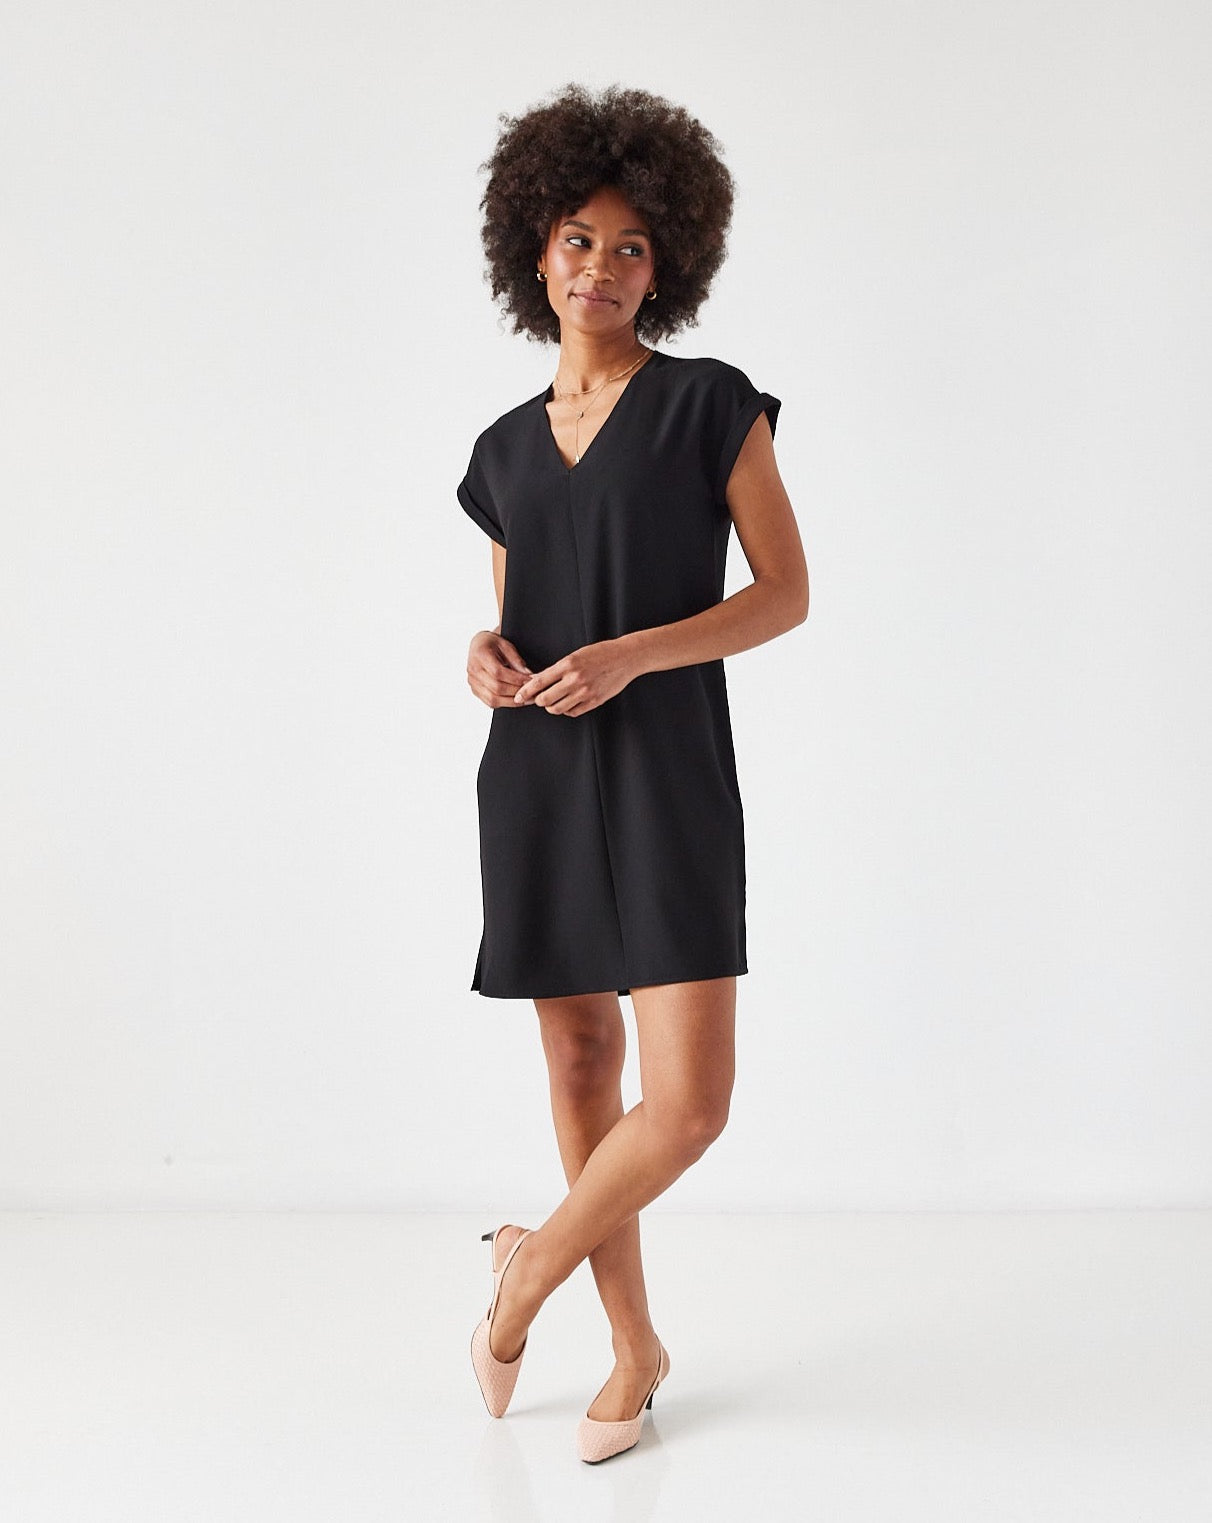 The Essential Dress in Eminence